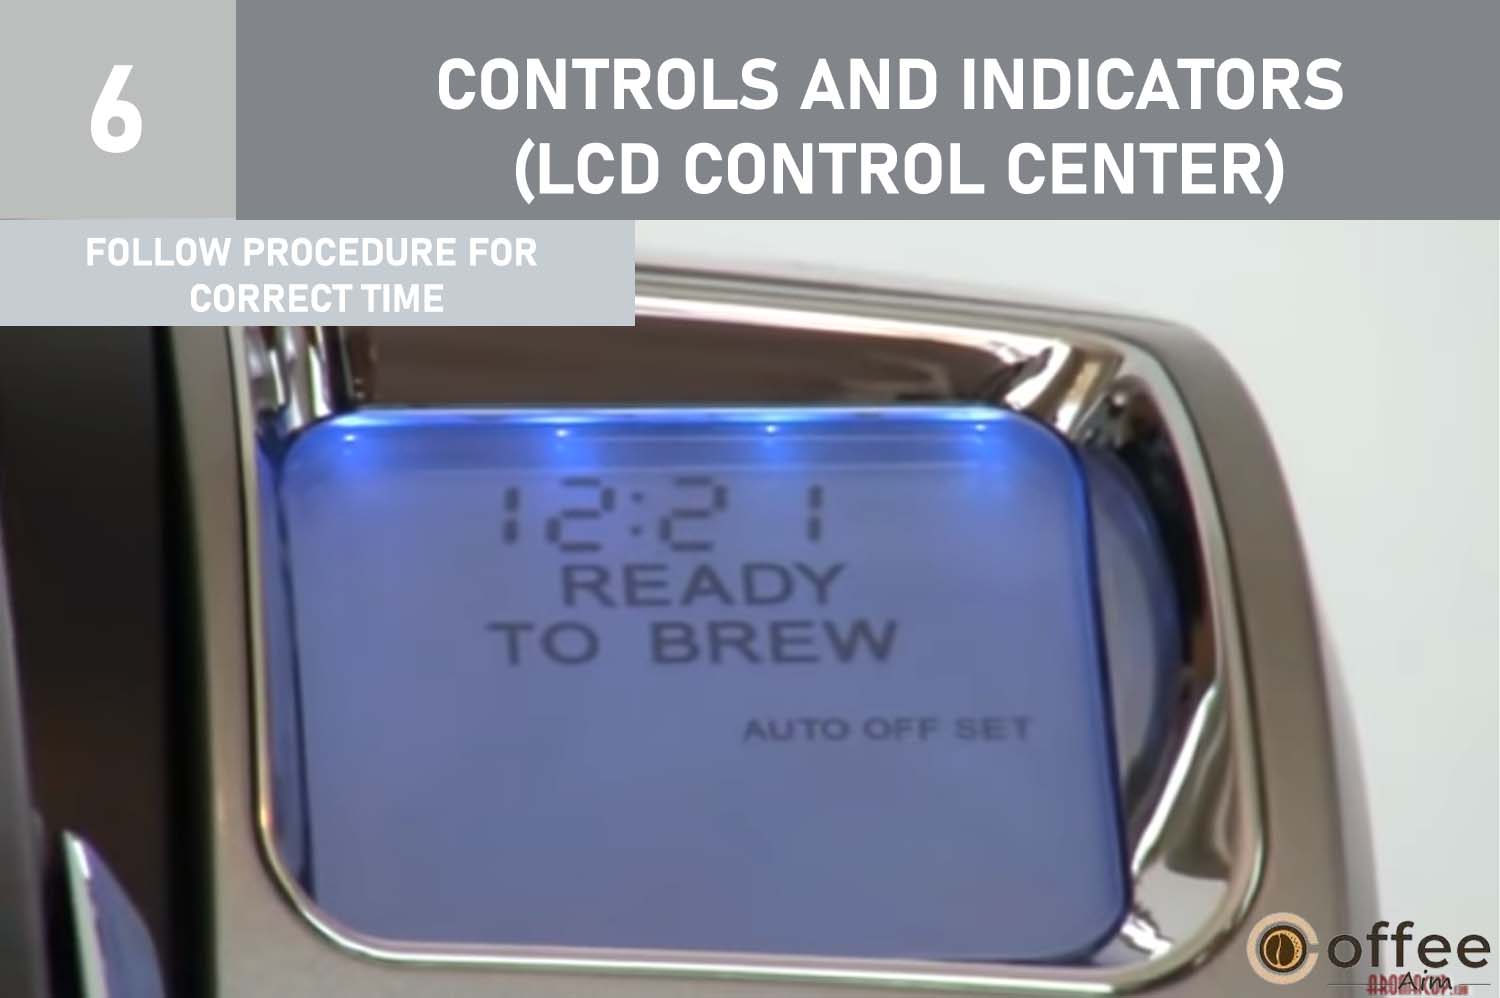 Following the outlined procedure is crucial to display the correct time on the LCD Control Center. In case of power loss, the clock needs to be reset promptly for proper Brewer functionality.